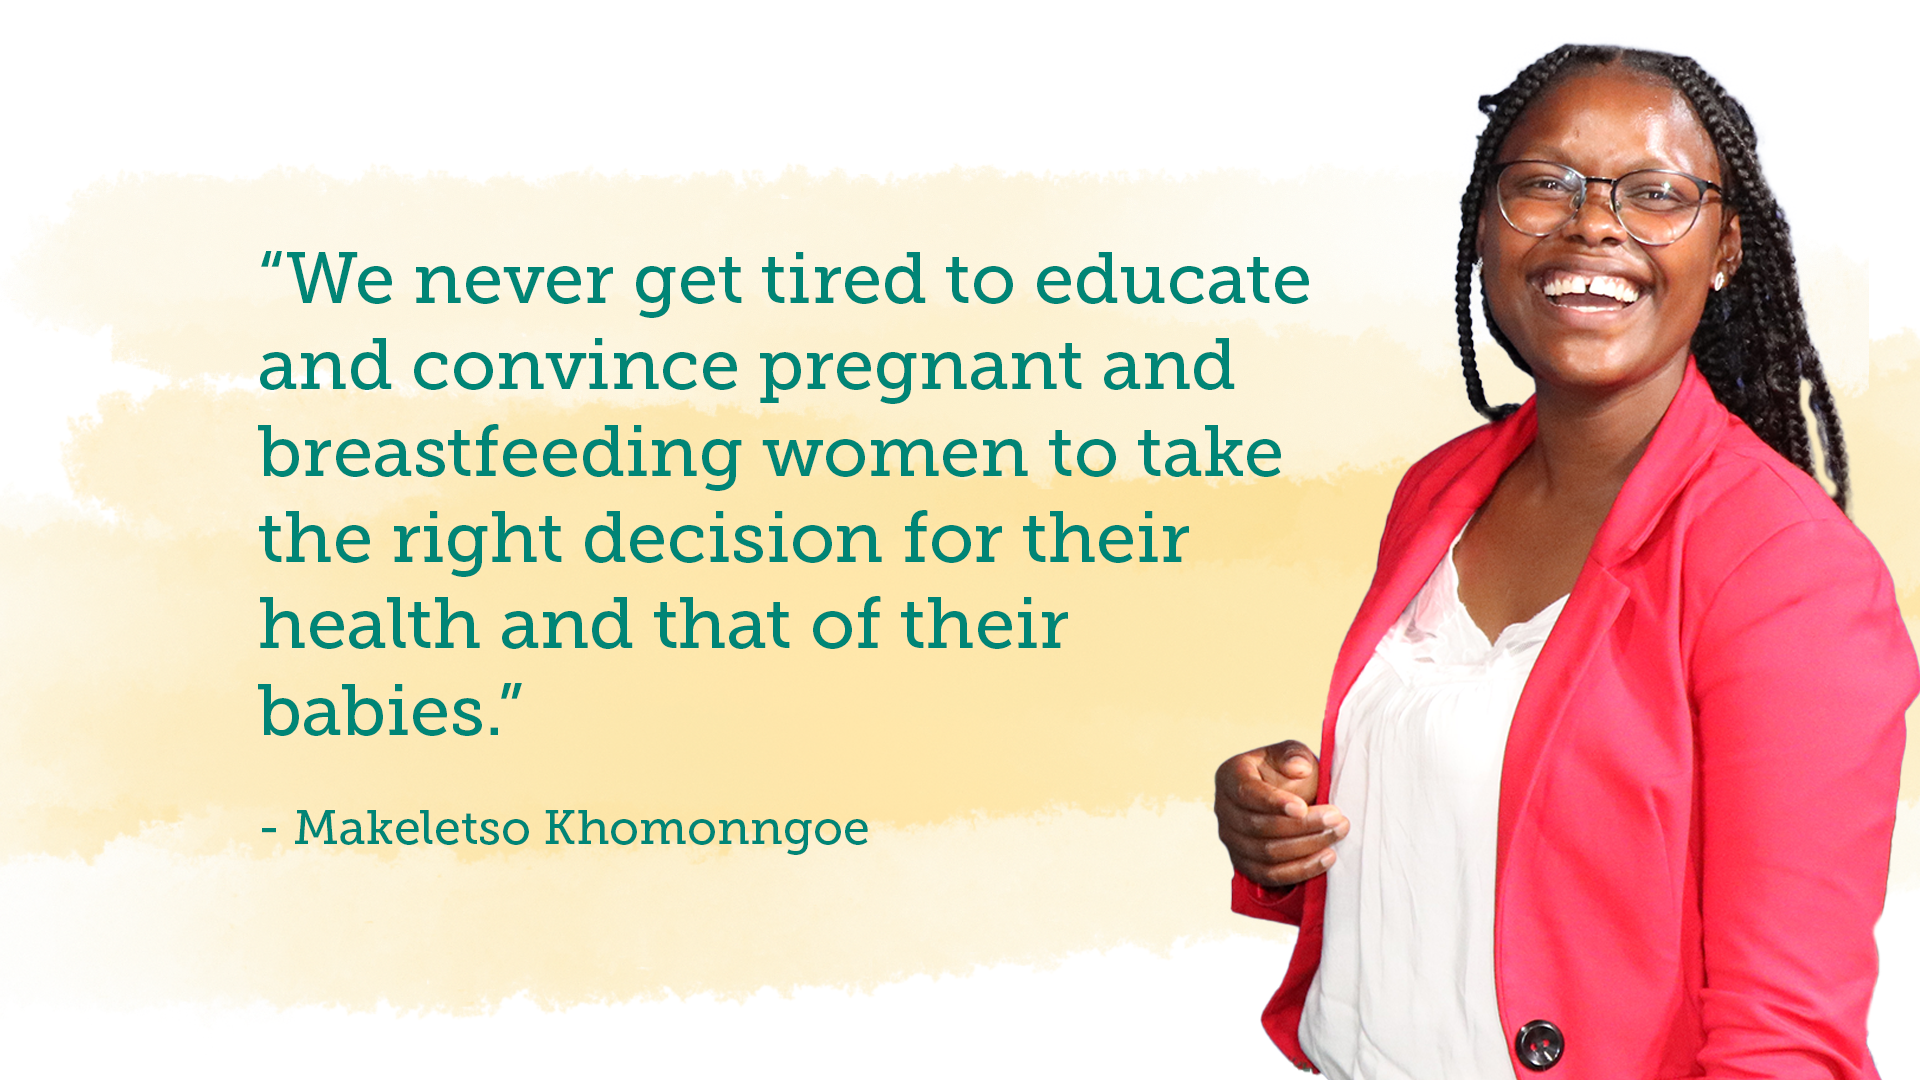 “We never get tired to educate and convince pregnant and breastfeeding women to take the right decision for their health and that of their babies." Quote Graphic